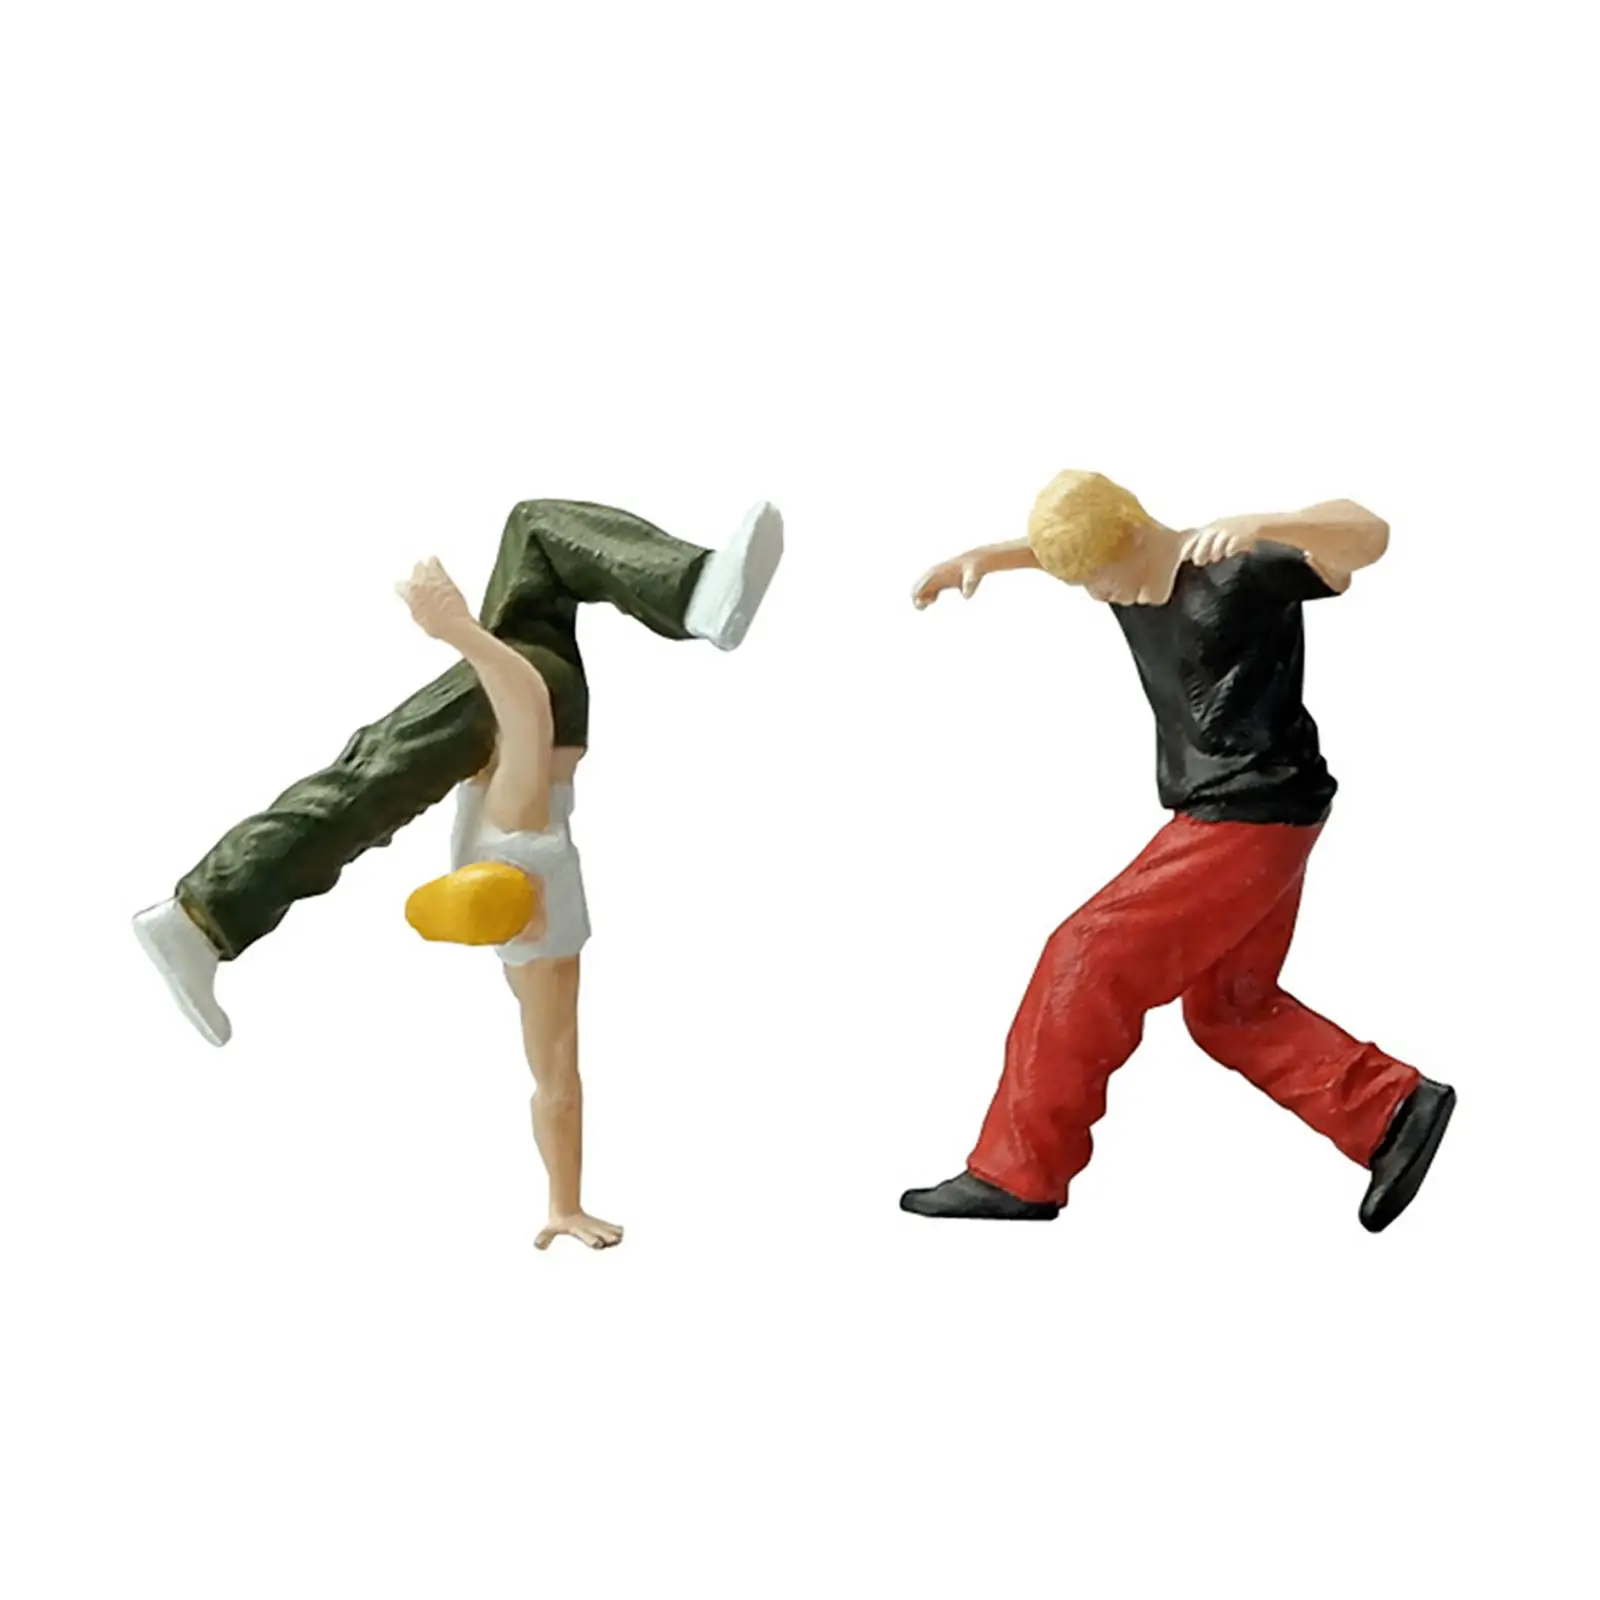 1:64 Scale Figure Street Dancer Model Tiny People for Layout Diorama Scenery Building Accessories DIY Projects Desktop Ornament